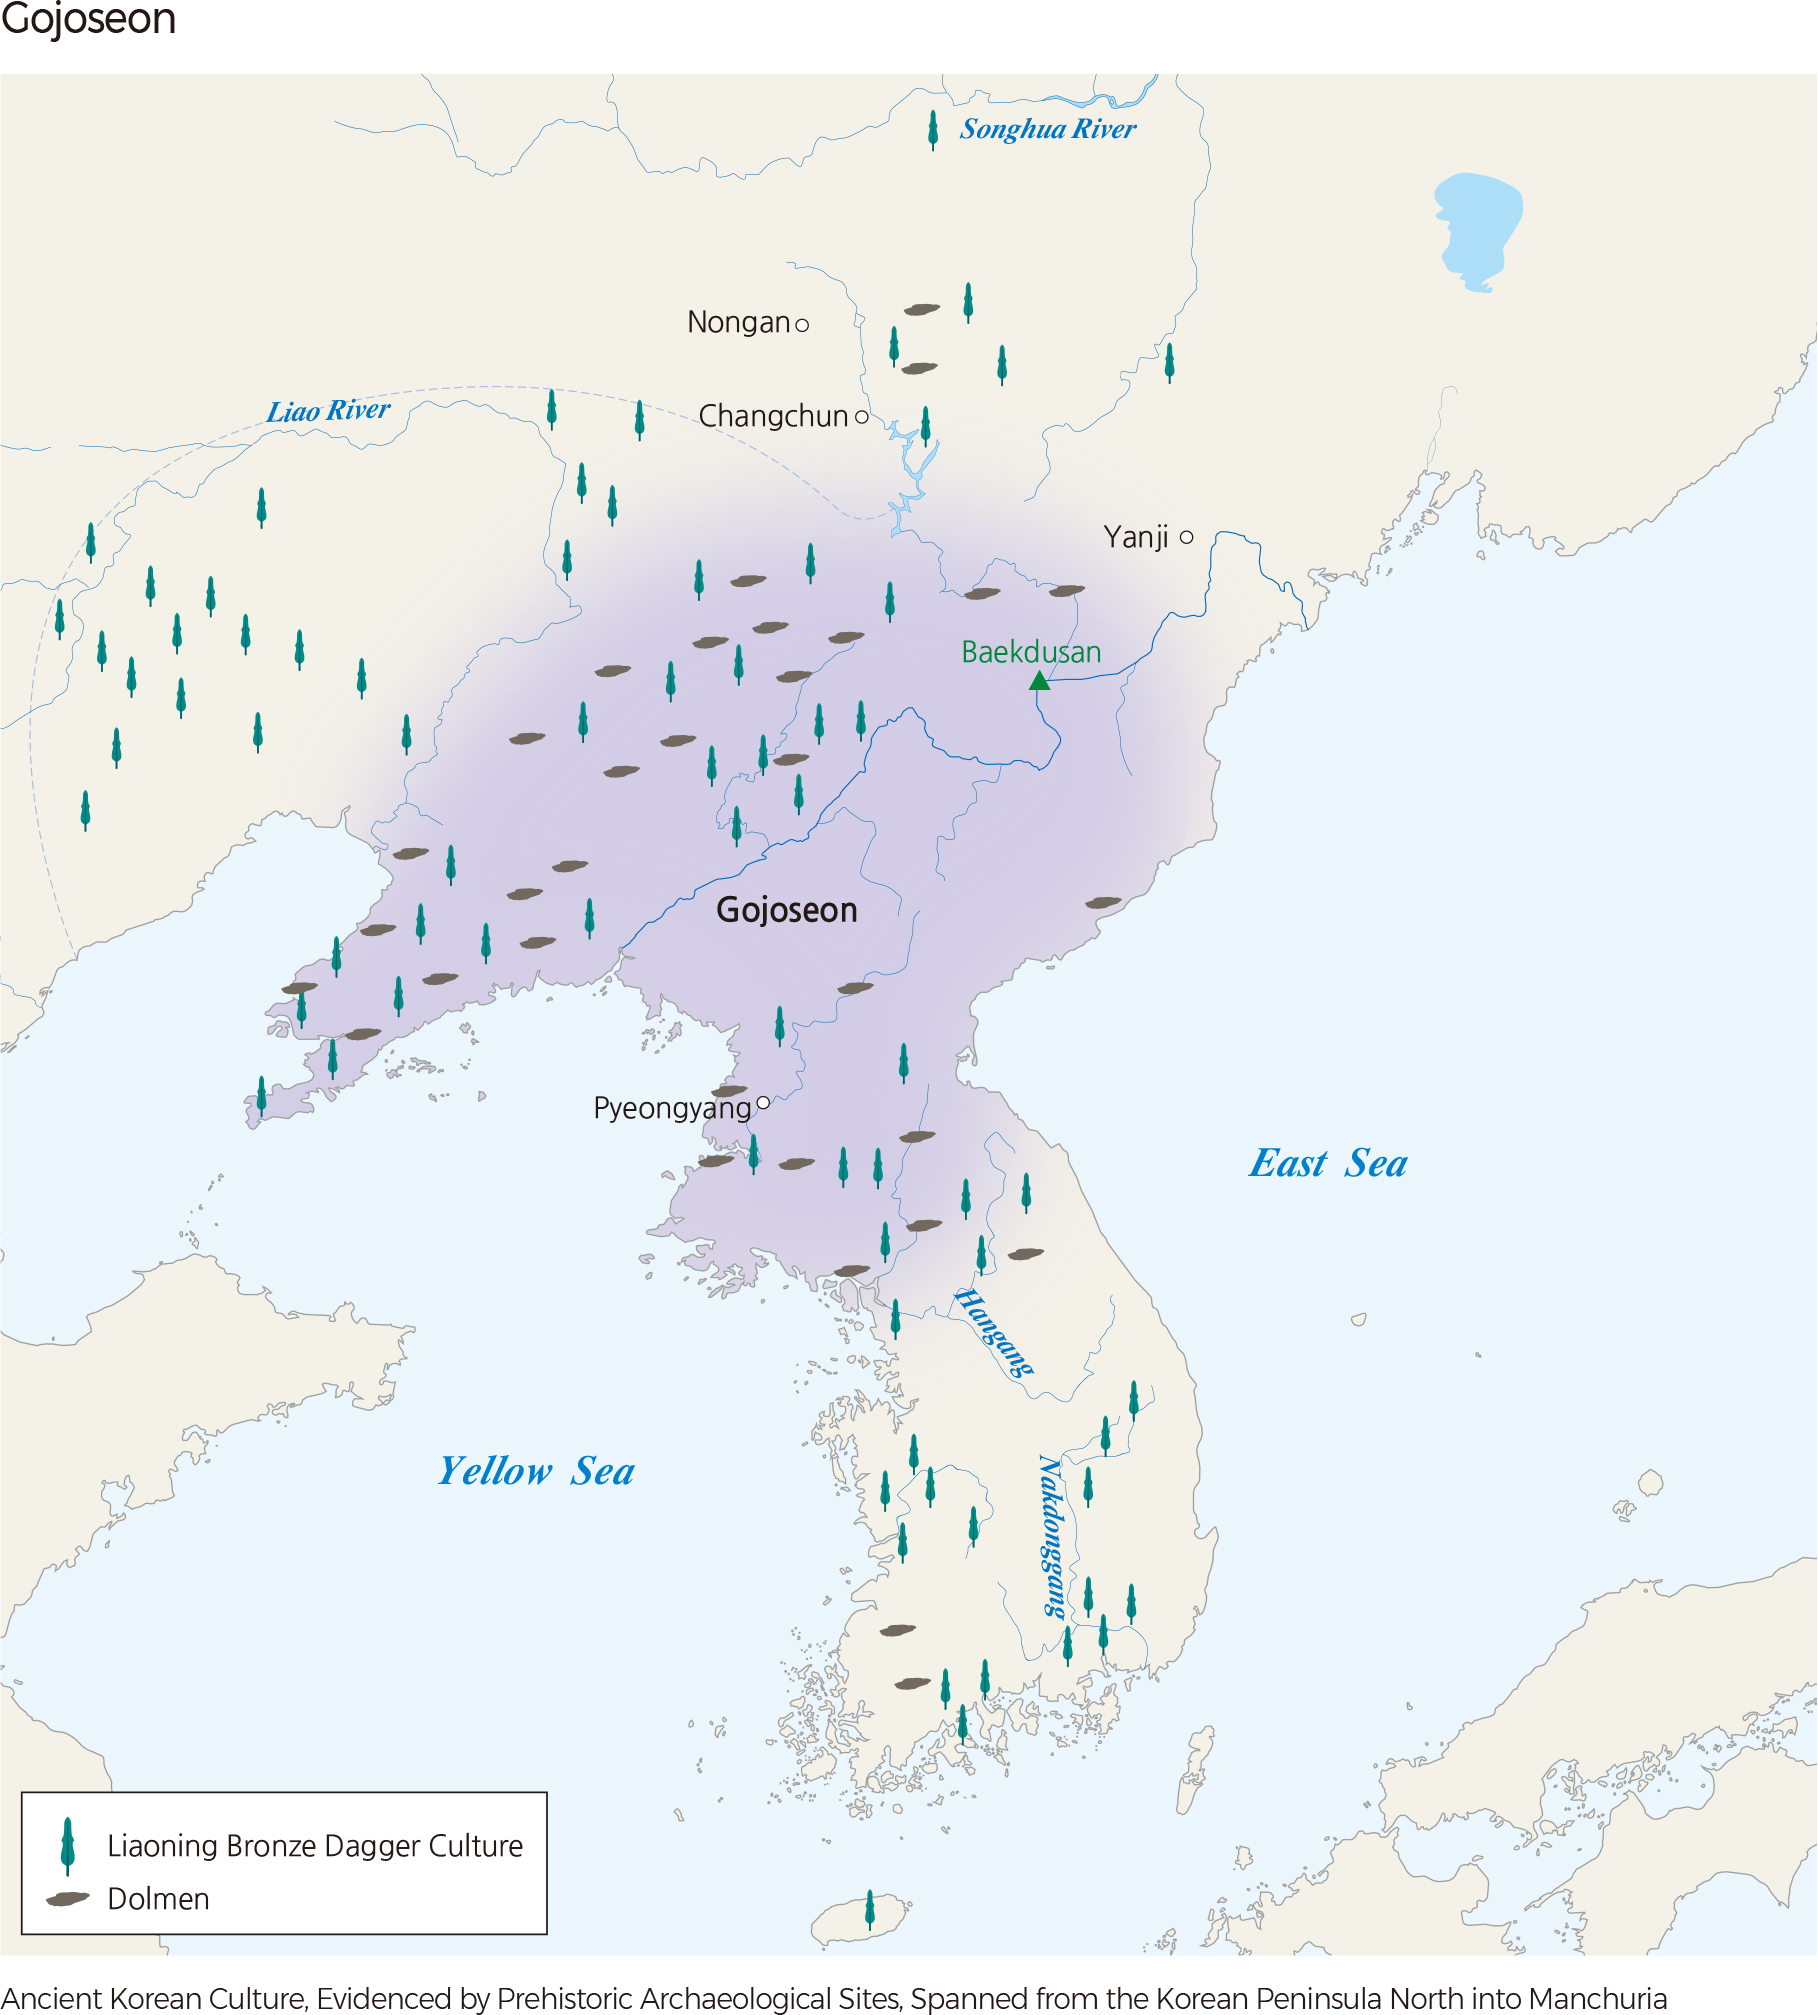 Bronze dagger and dolmen sites are distributed throughout Manchuria and the Korean Peninsula, with Gojoseon being centered in the northern part of the Korean Peninsula